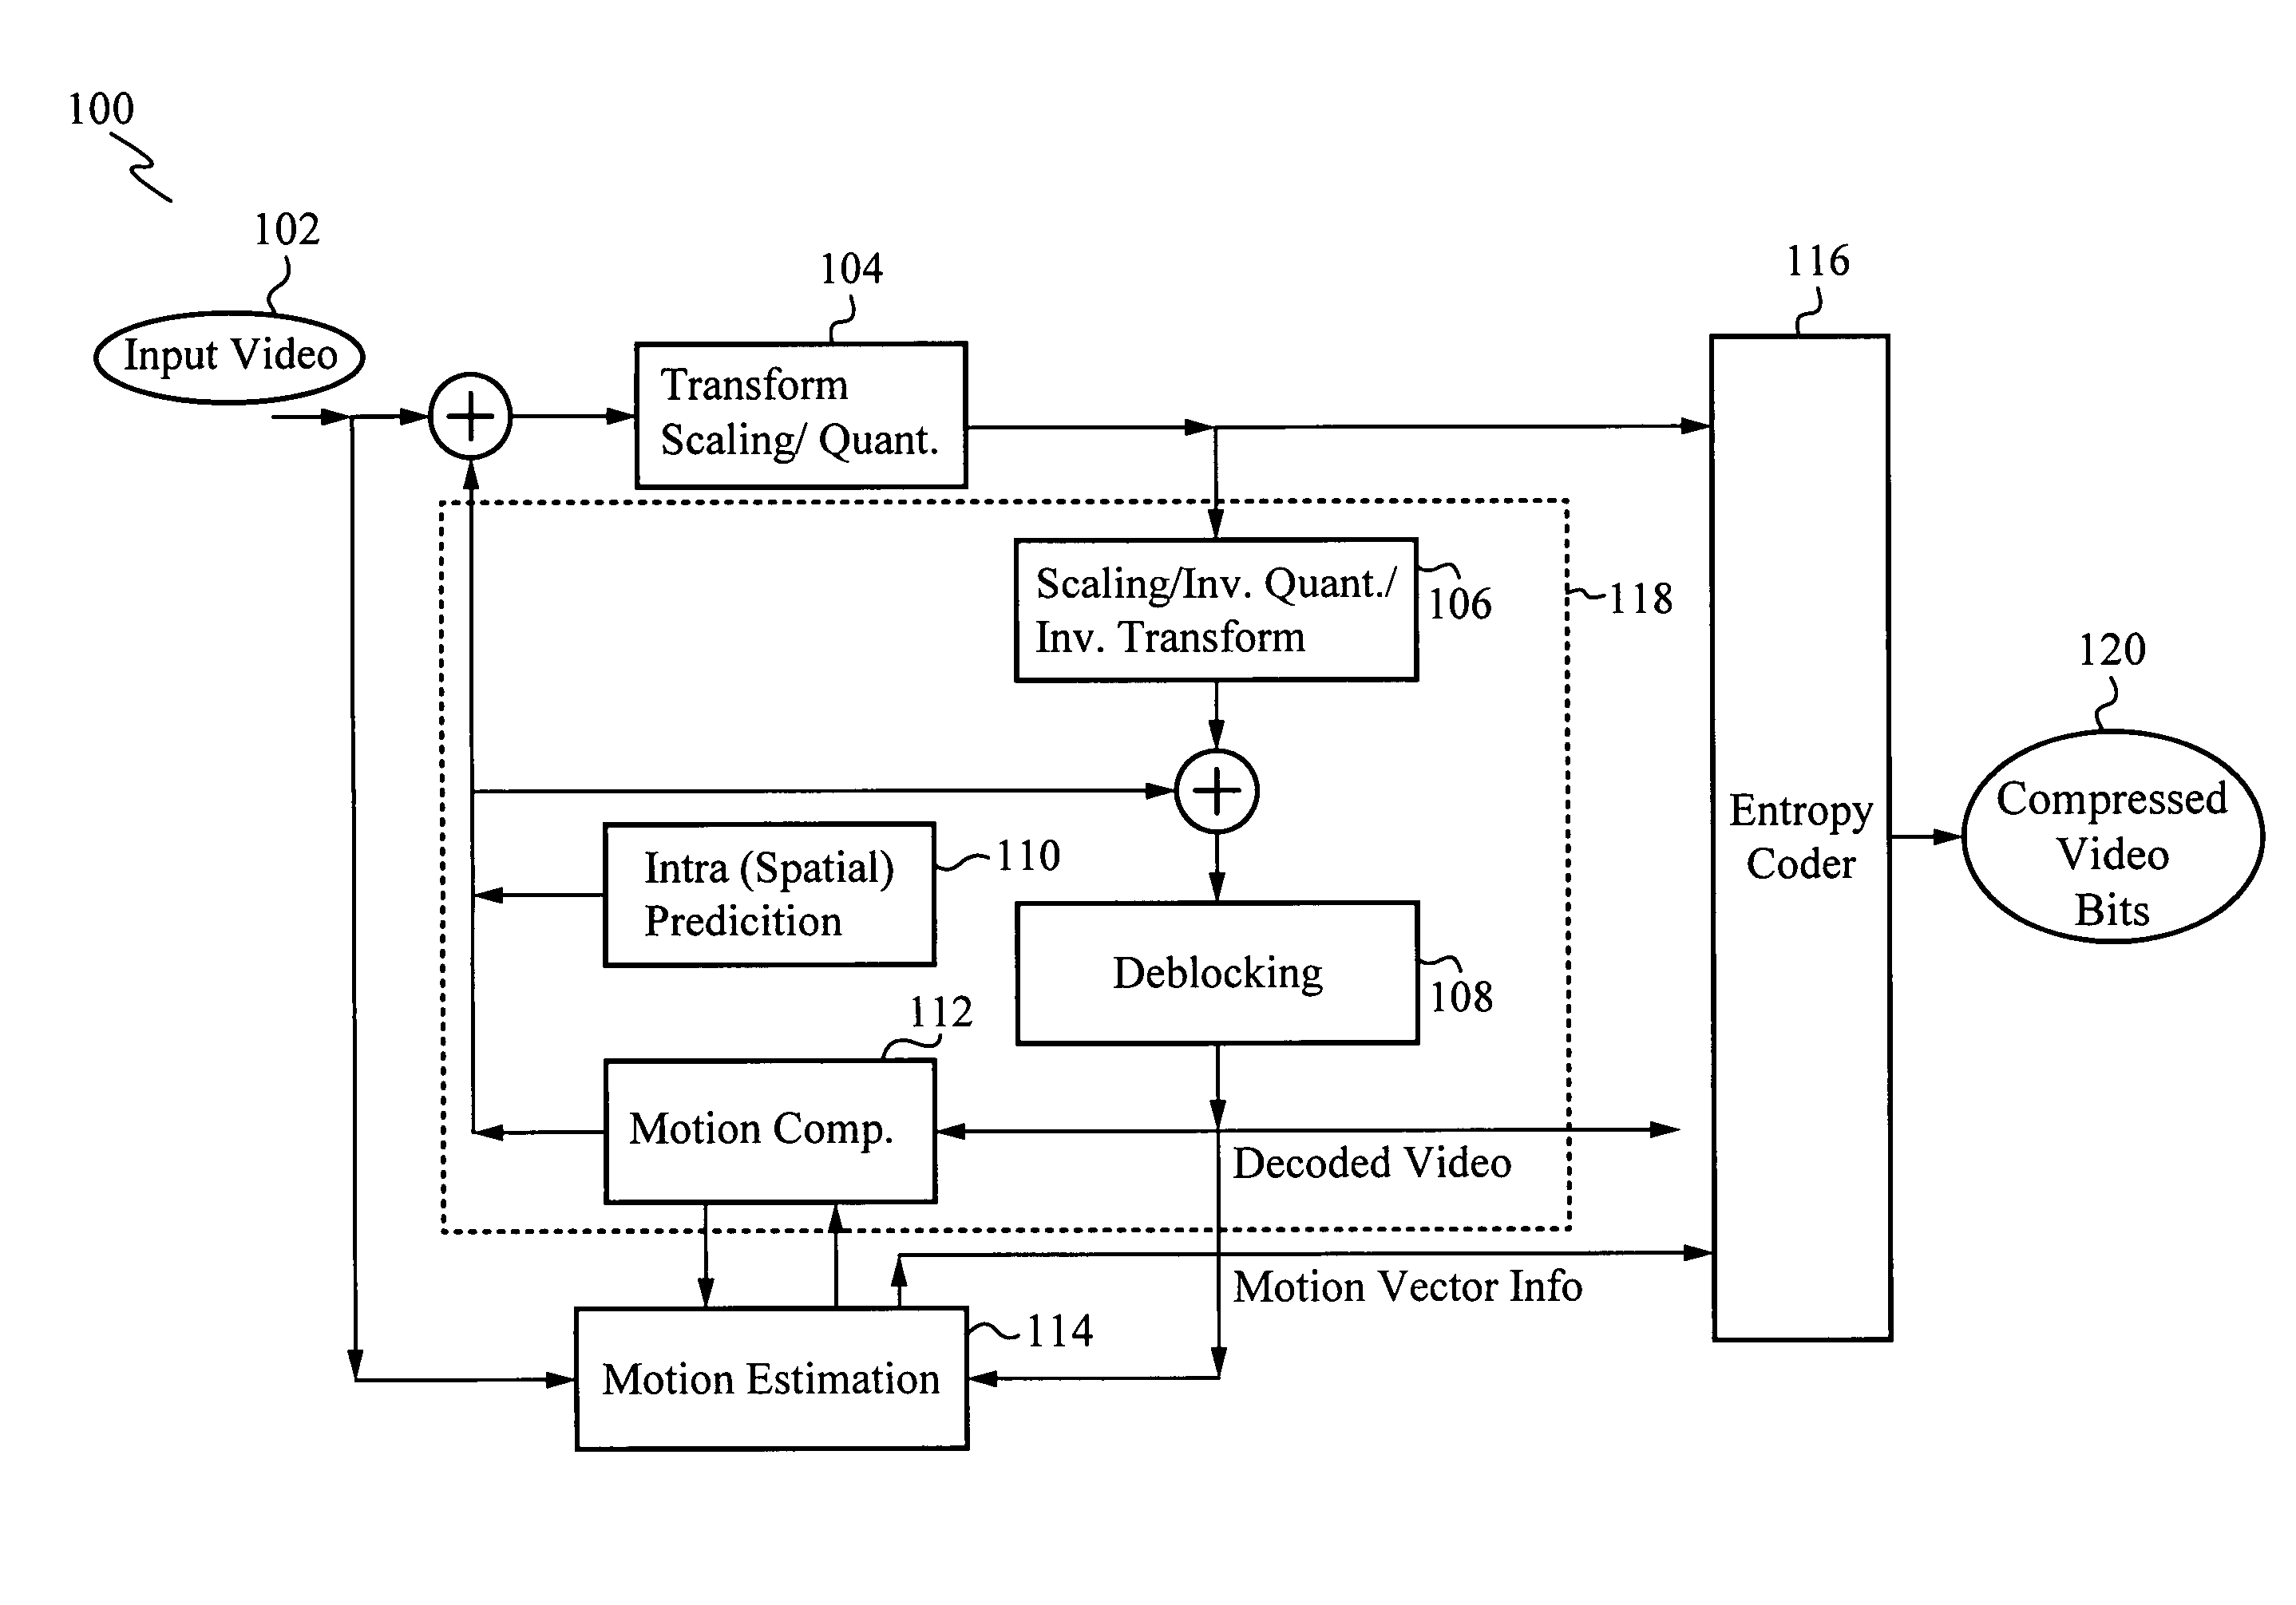 Method of reducing computations in intra-prediction and mode decision processes in a digital video encoder